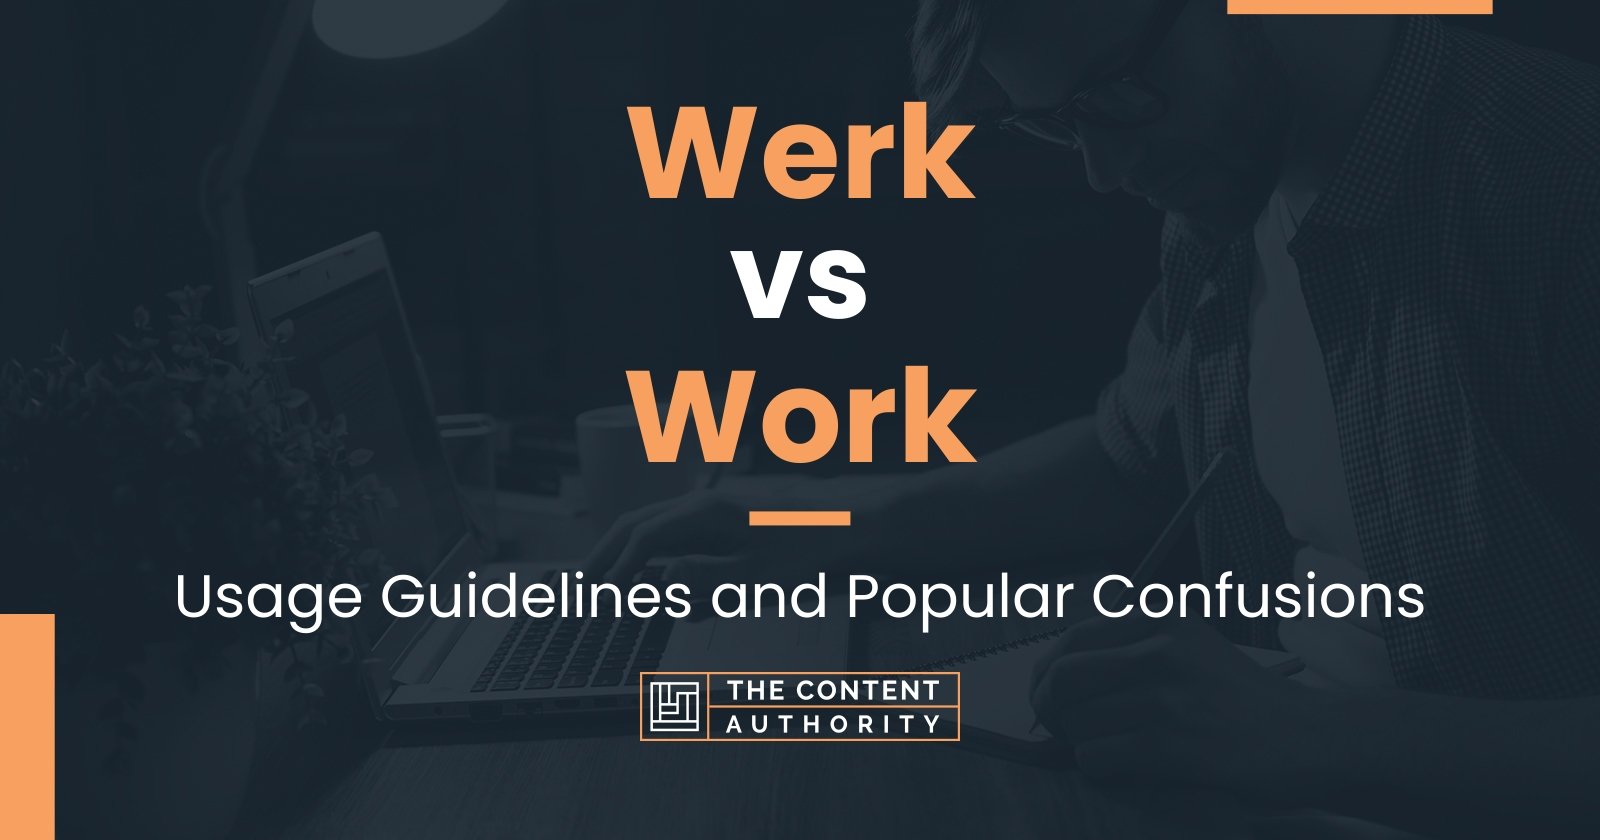 Werk vs Work: Usage Guidelines and Popular Confusions